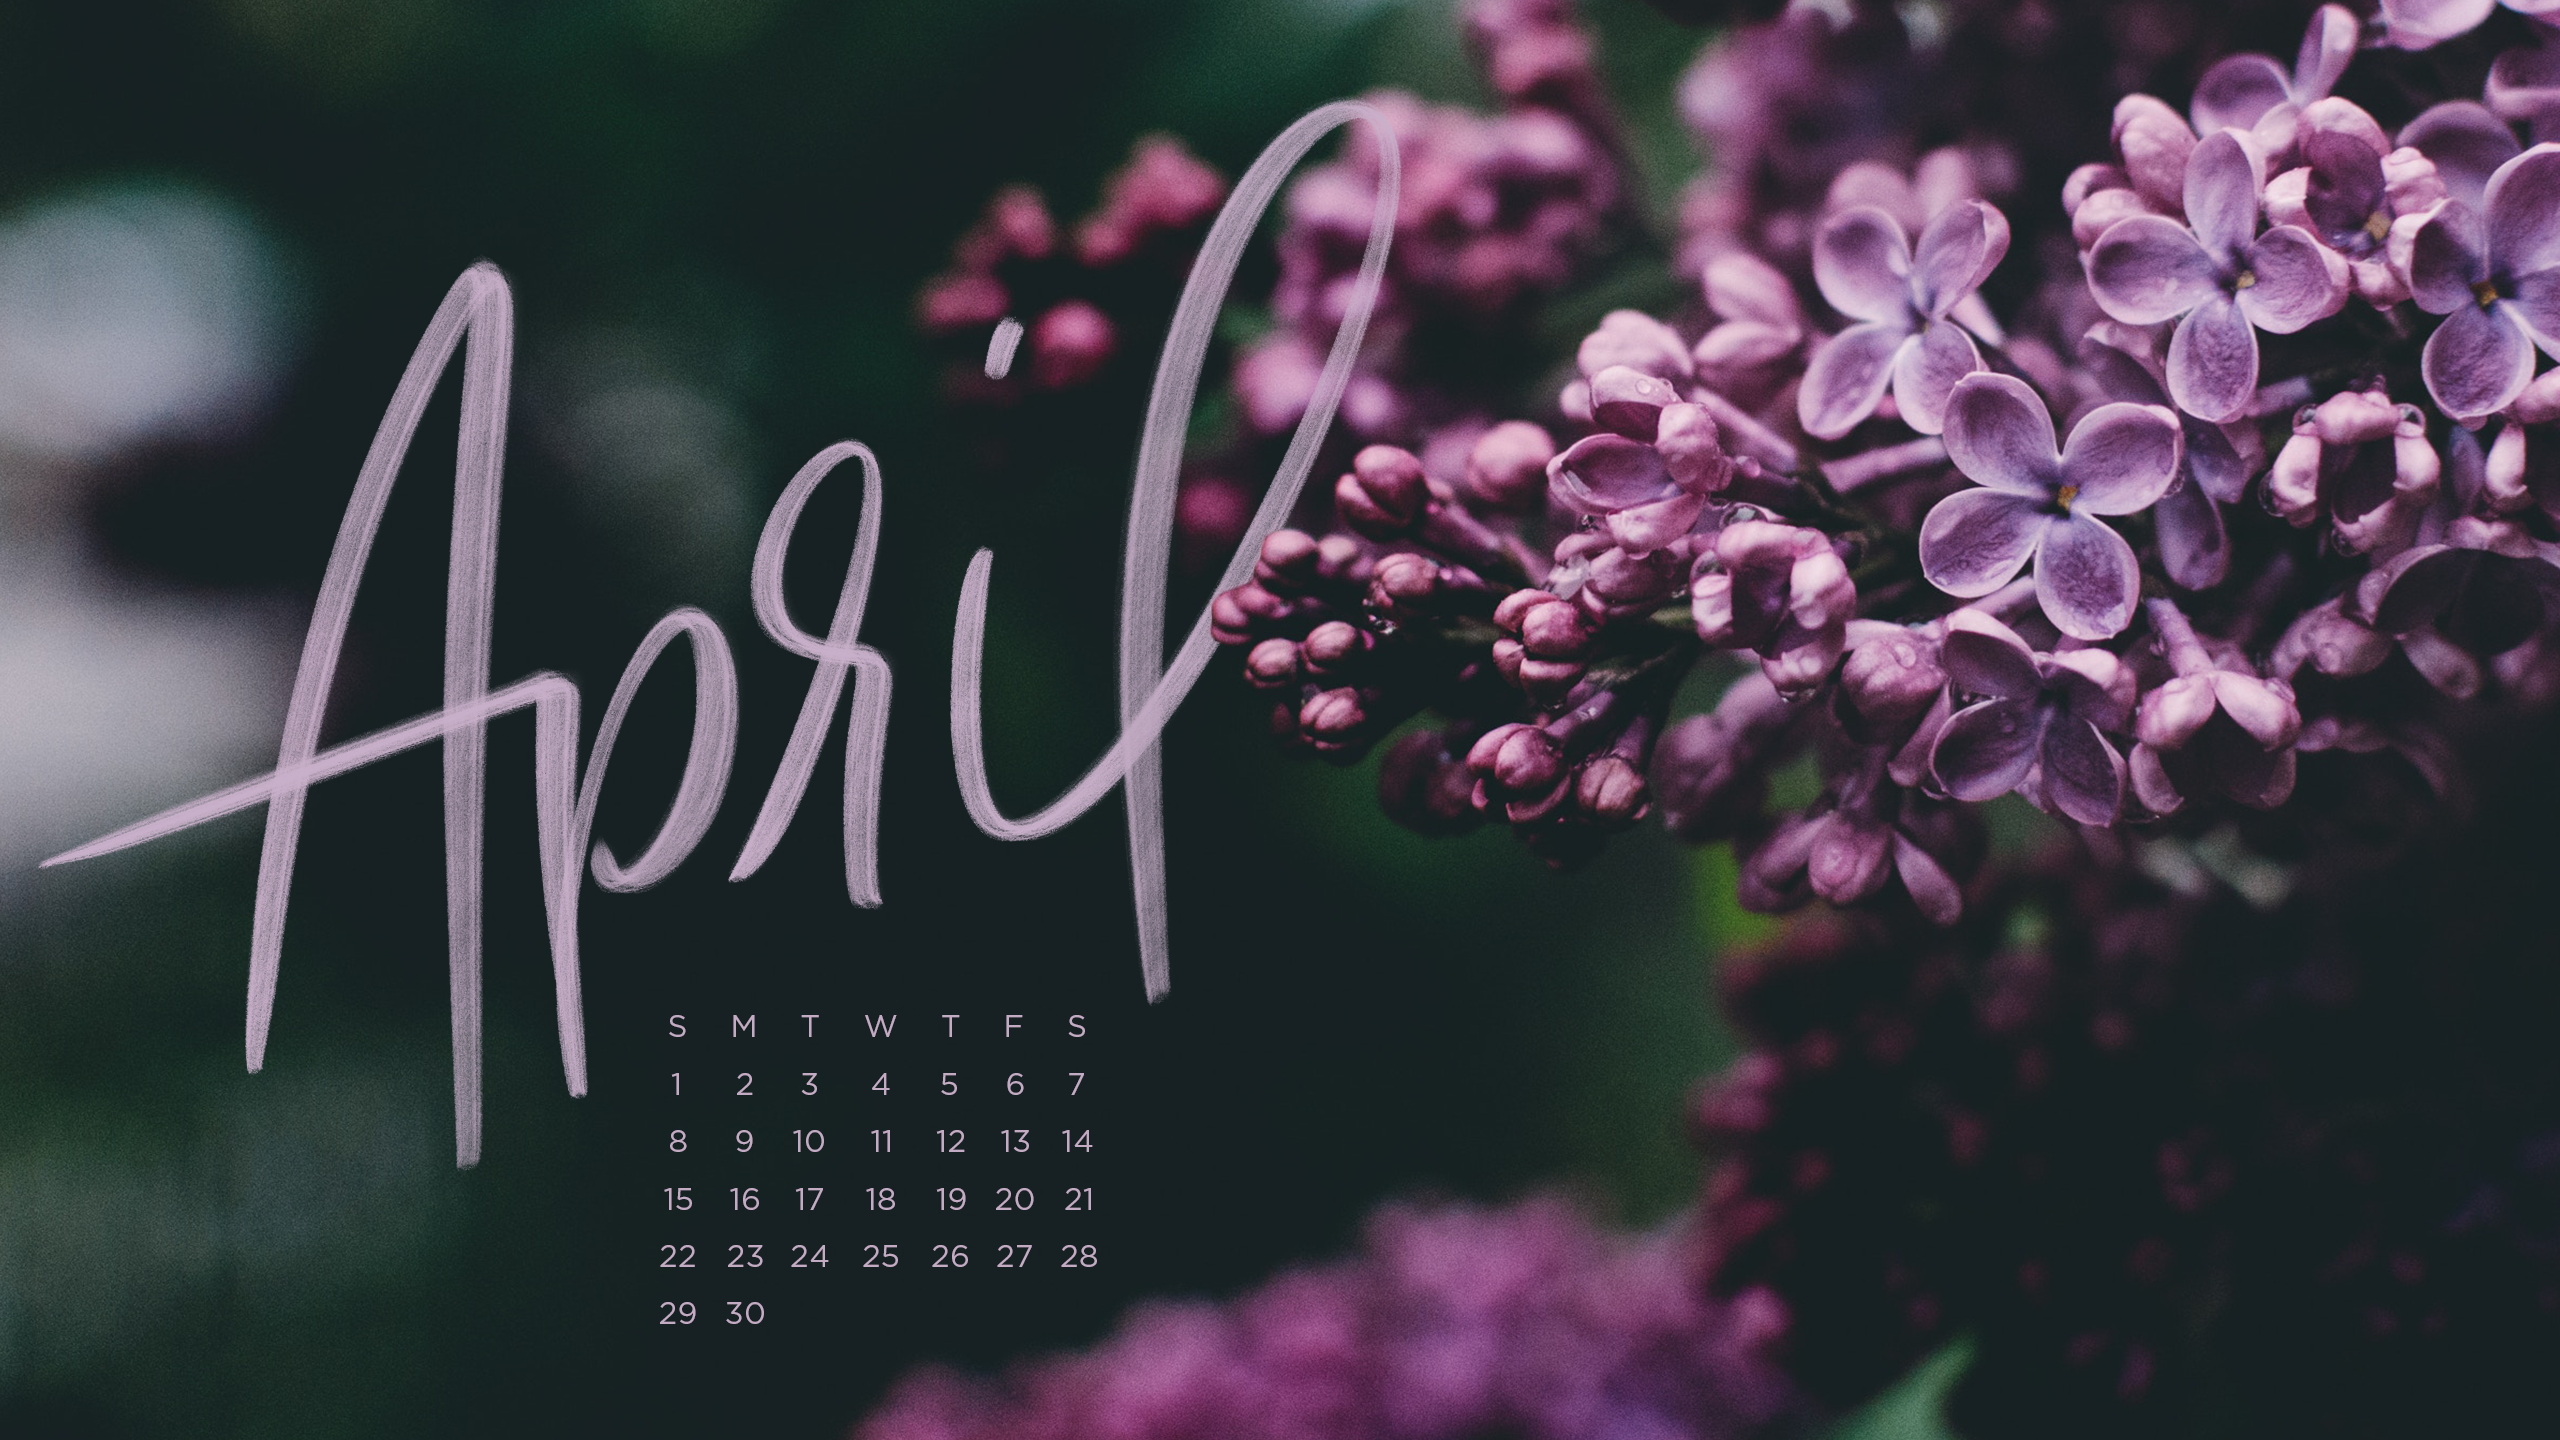 April 2022 Calendar Wallpaper Images  Free Photos PNG Stickers Wallpapers   Backgrounds  rawpixel